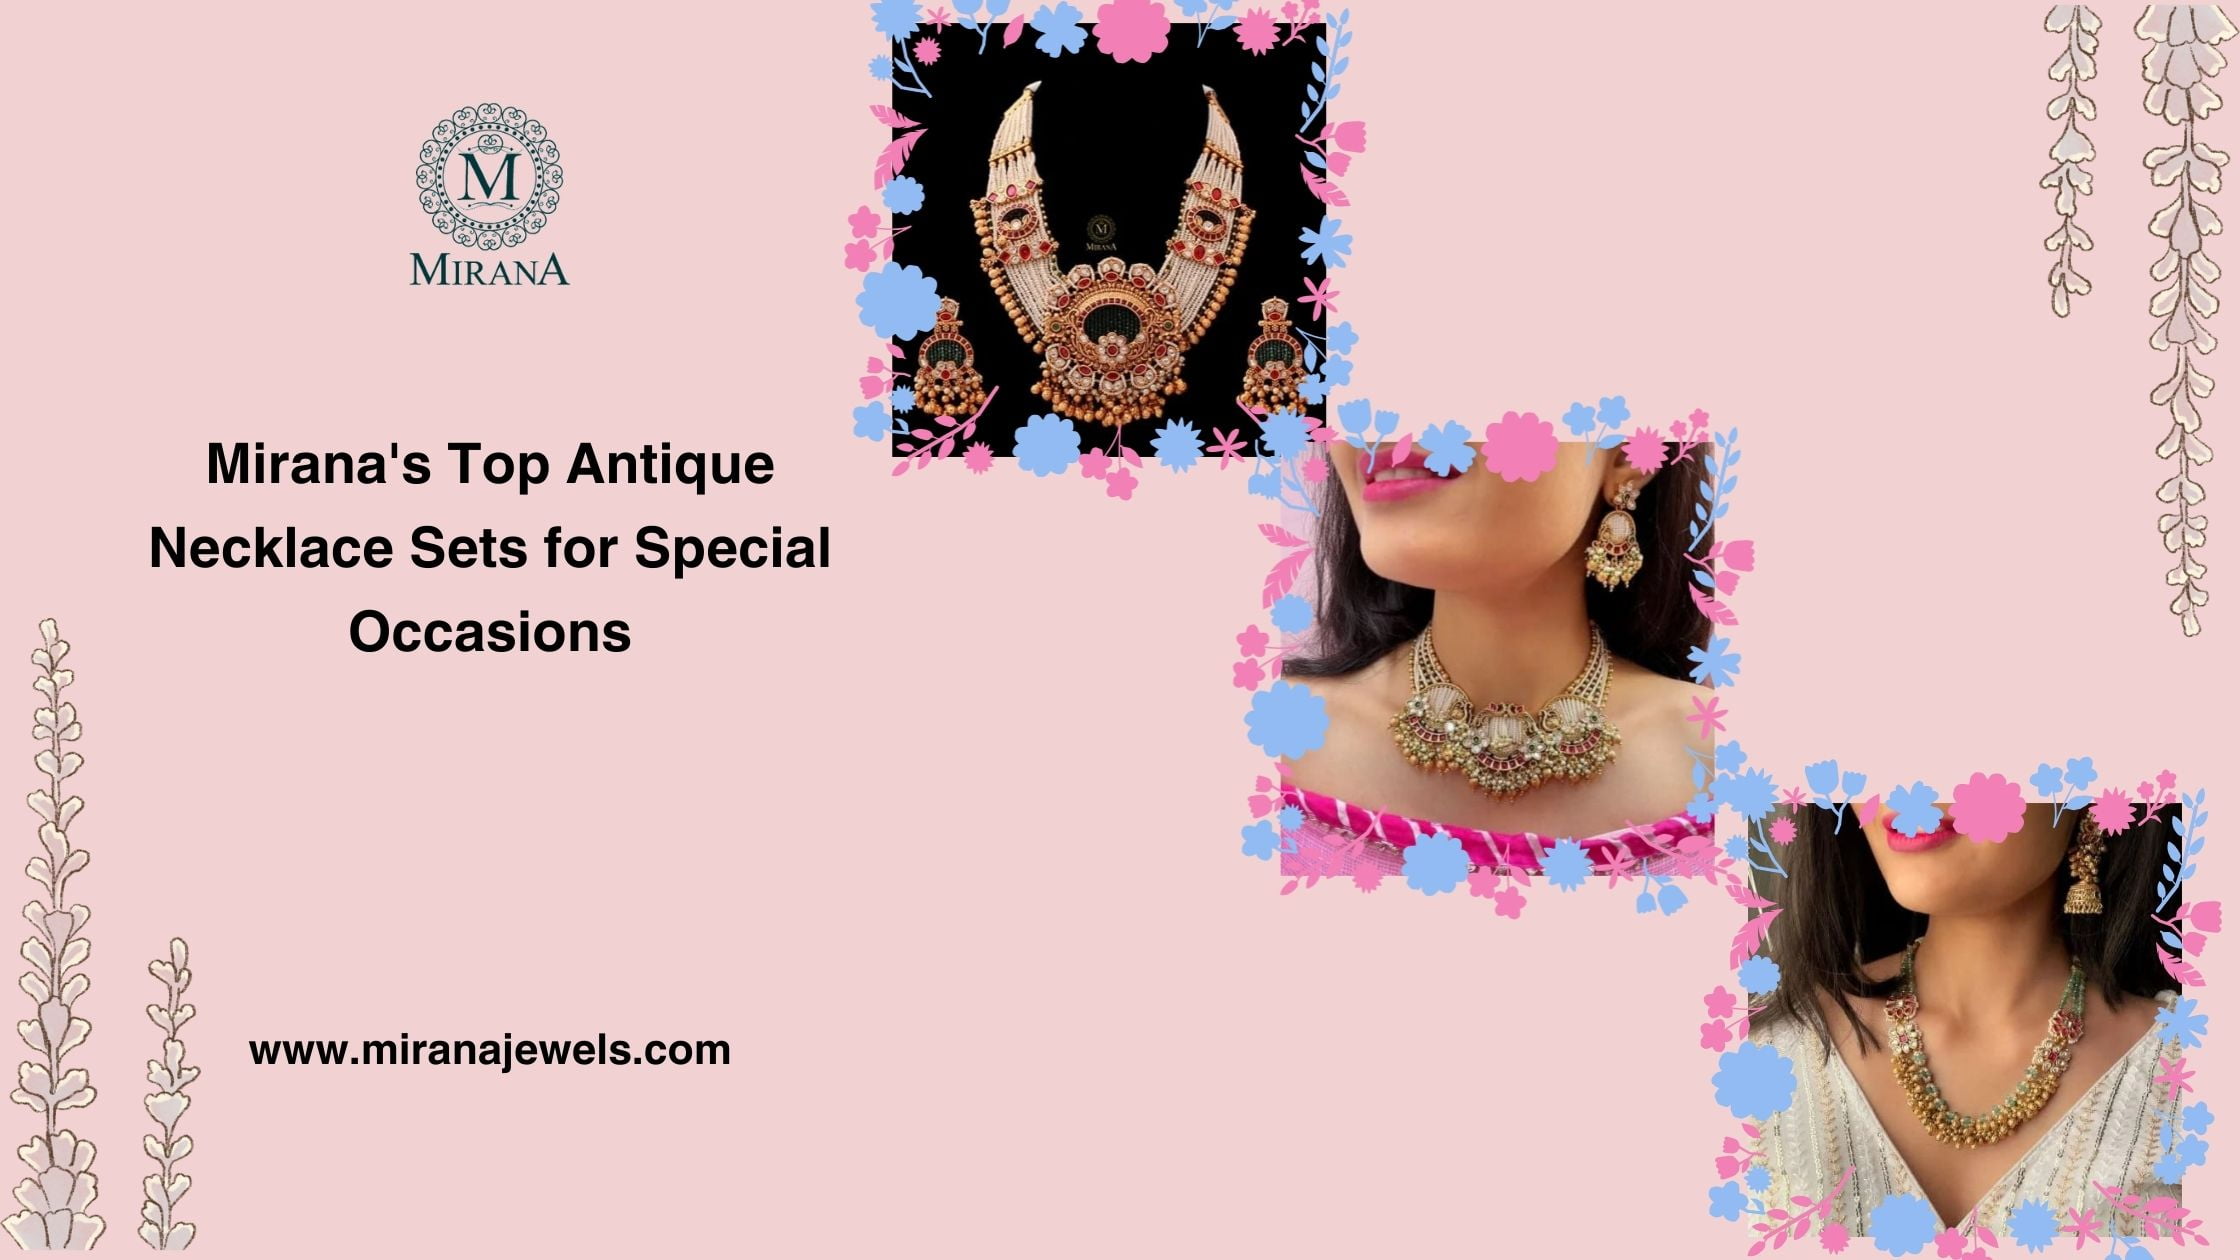 Mirana's Top Antique Necklace Sets for Special Occasions